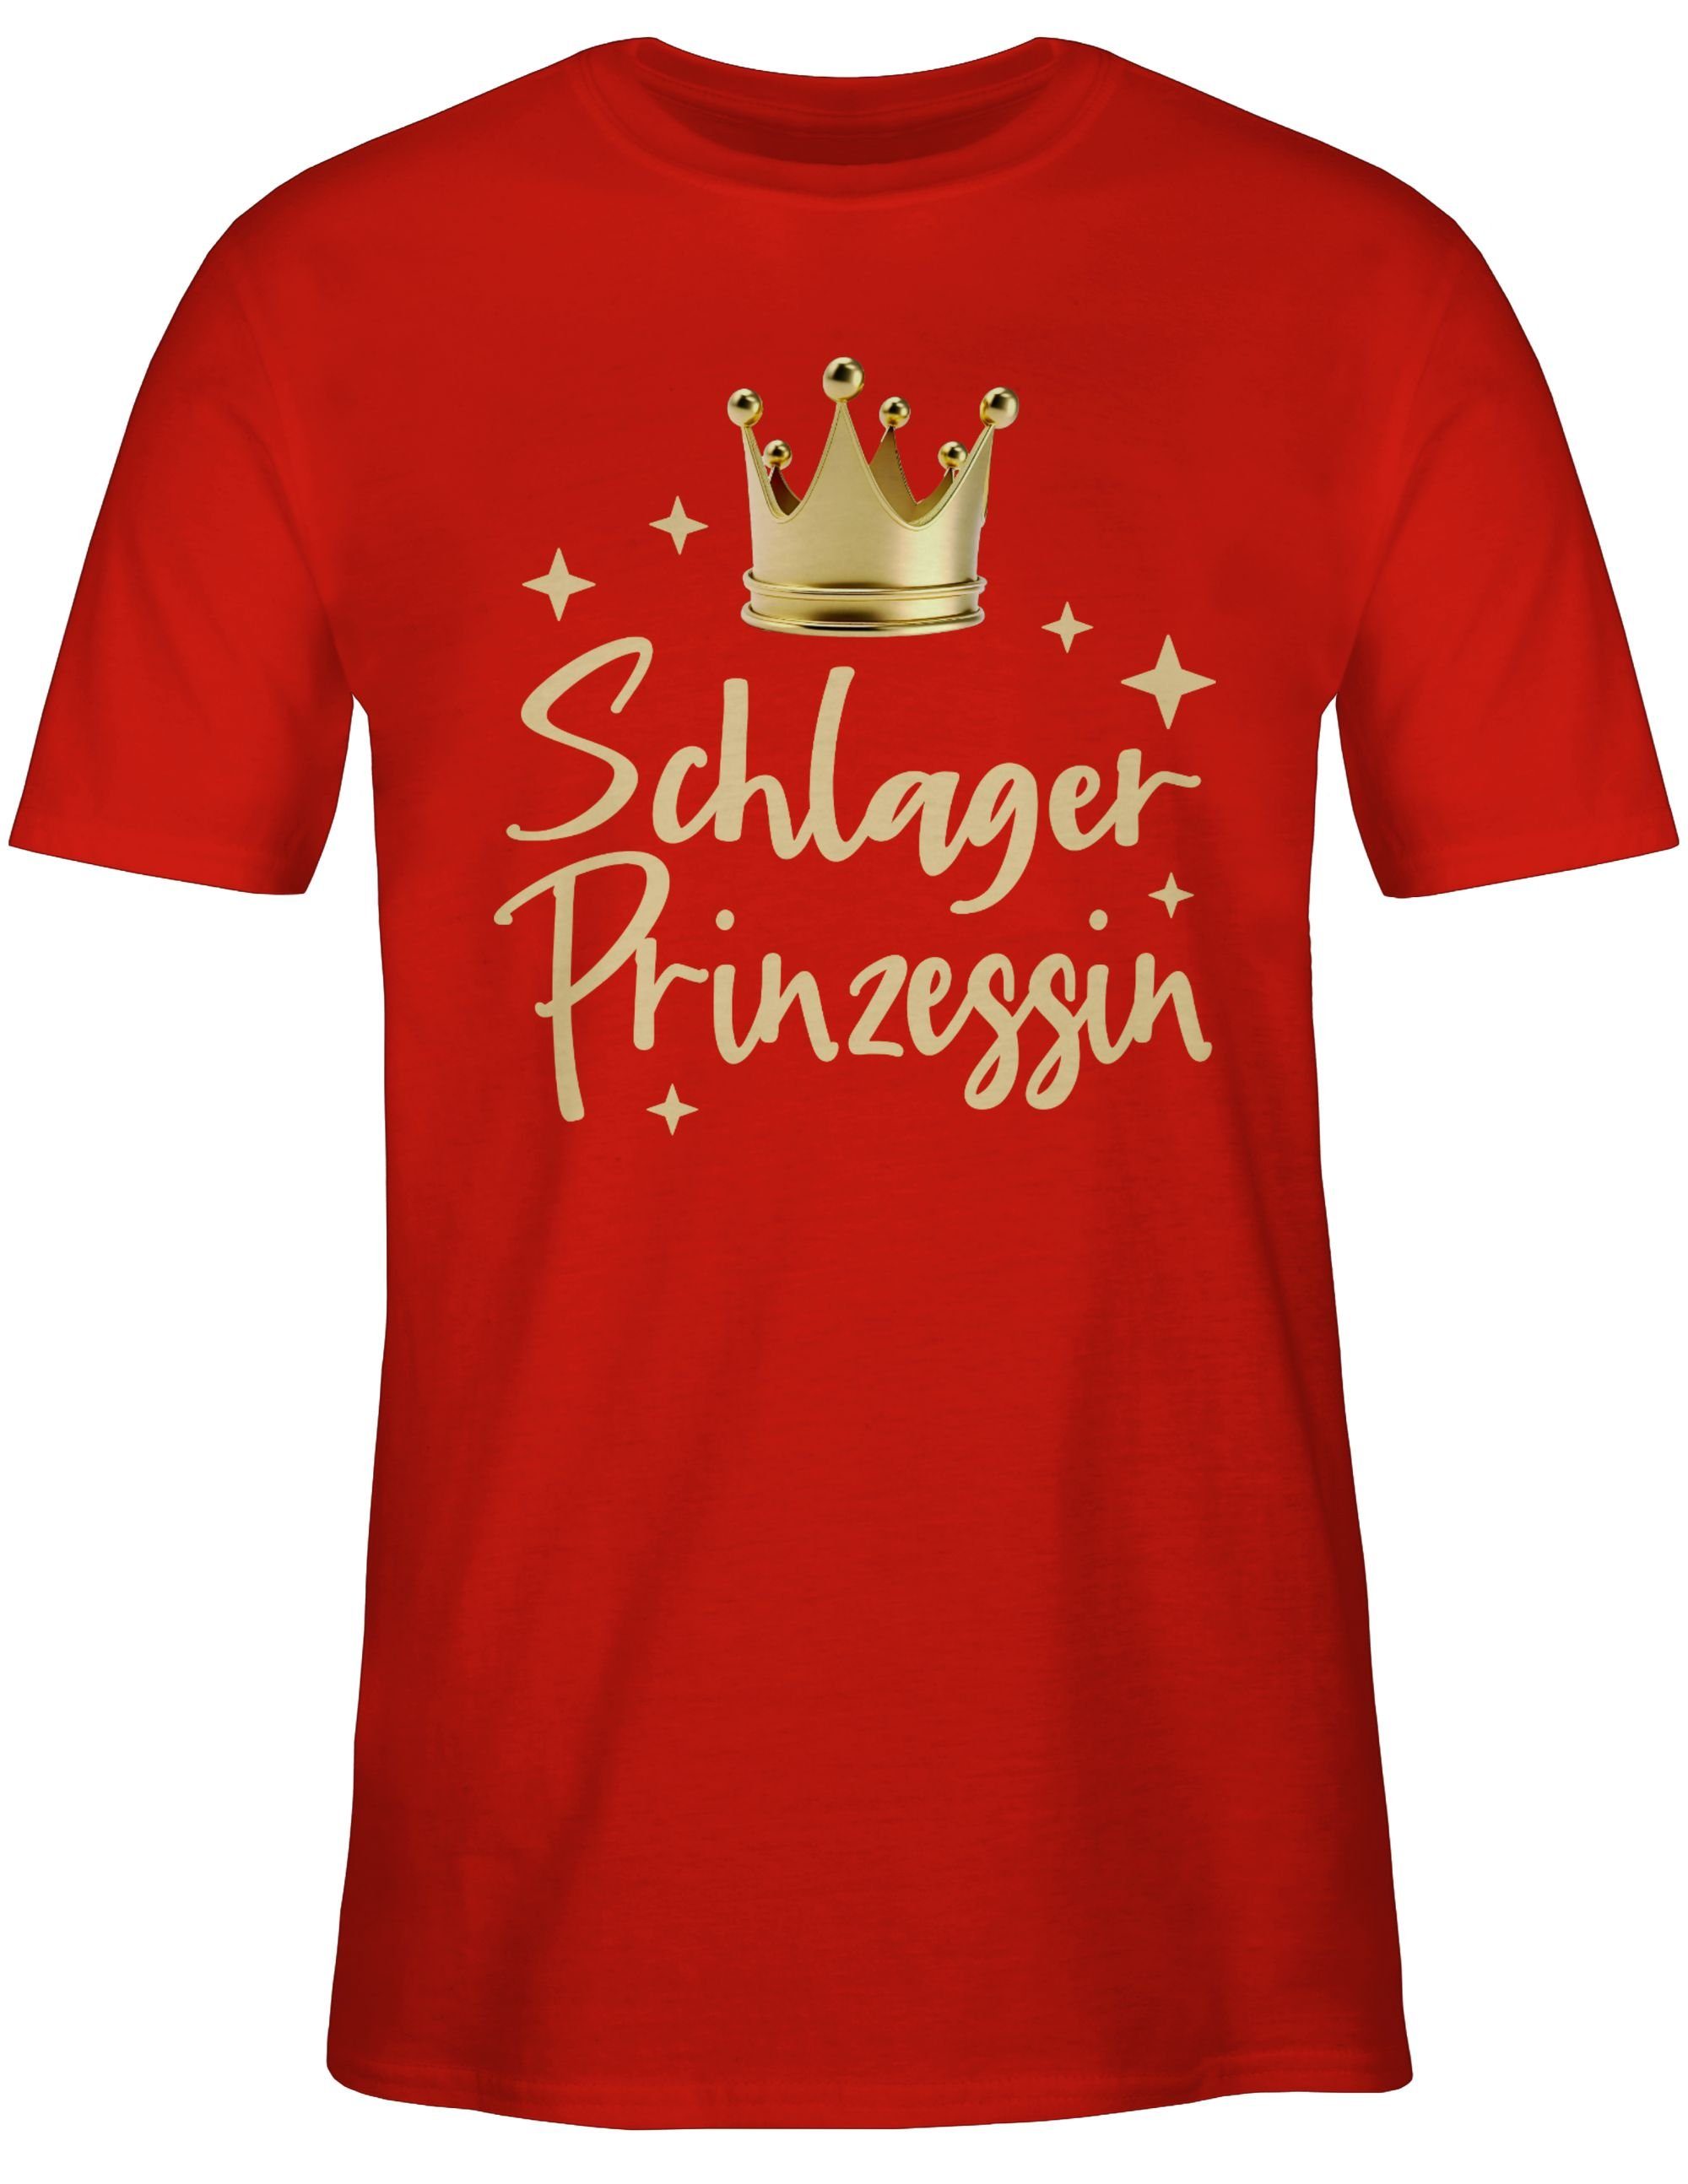 Shirtracer T-Shirt Schlager Prinzessin - Schlagerparty Konzert Volksmusik Schlager Party Outfit 03 Rot